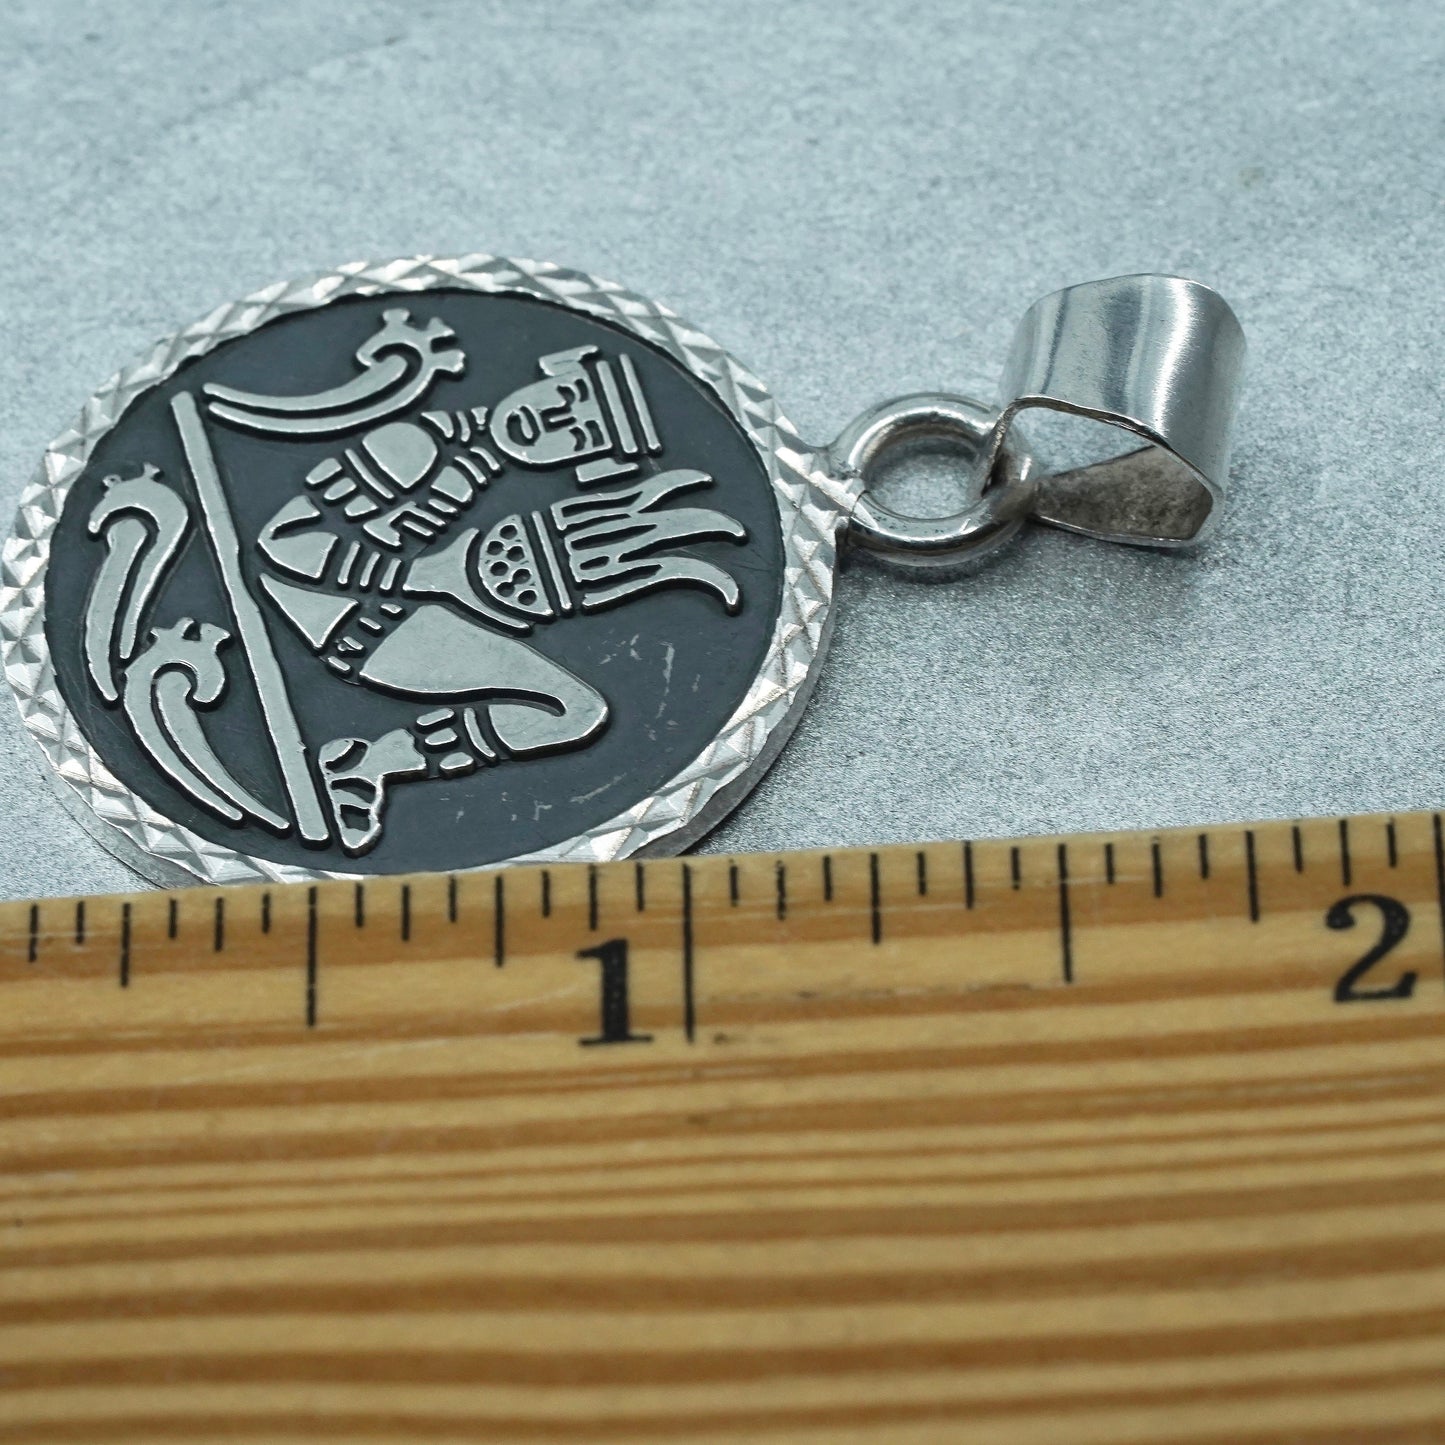 Vintage Mexico sterling 925 silver handmade embossed mayan figure pendant charm